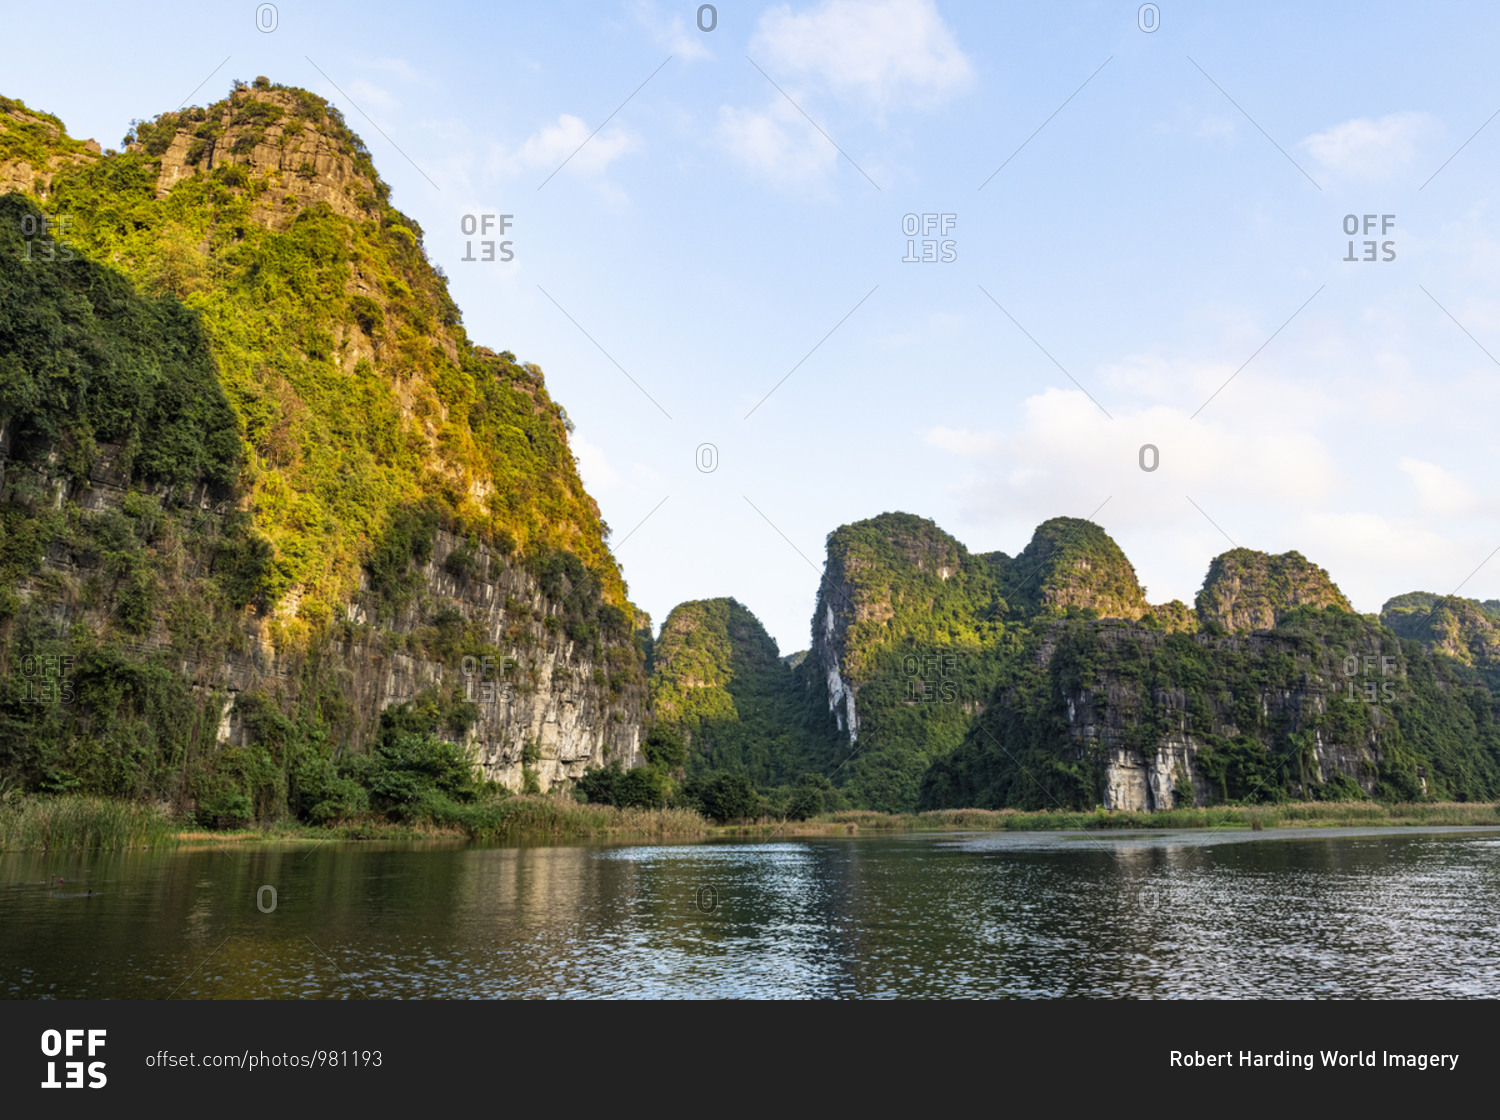 Limestone mountains in the scenic Trang An Landscape Complex, UNESCO World Heritage Site, Vietnam, Indochina, Southeast Asia, Asia